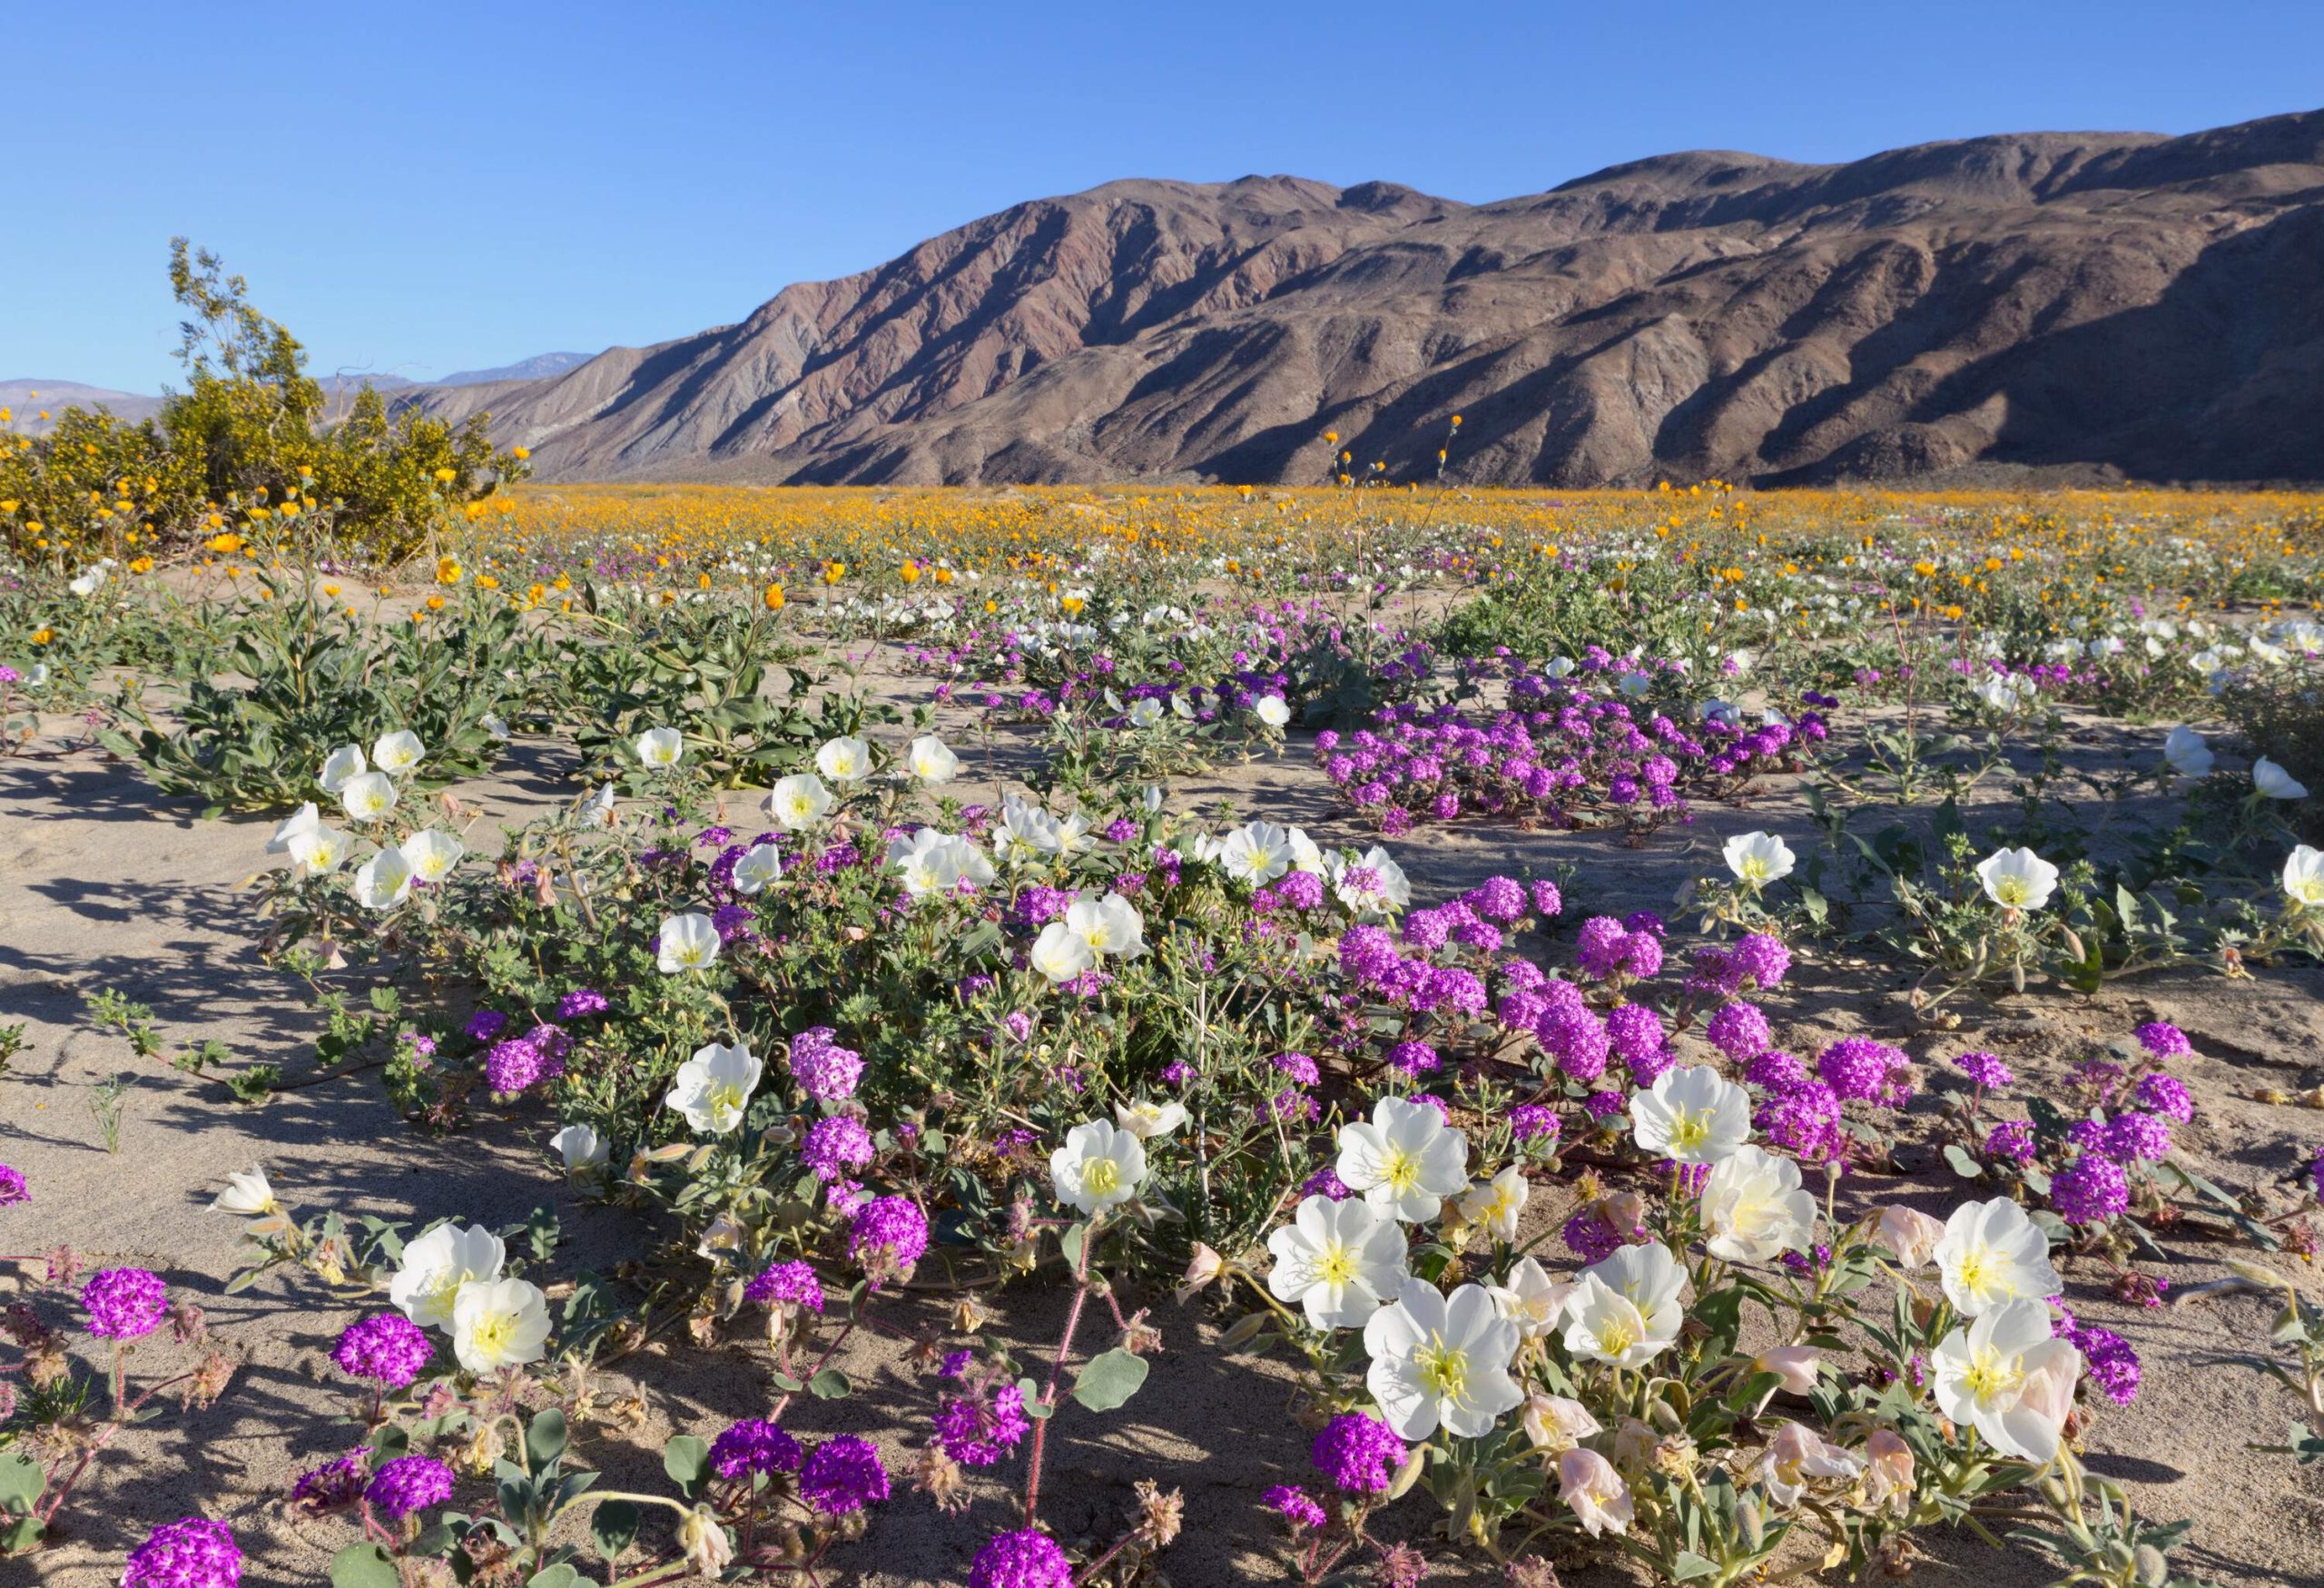 Blooming flowers in purple, white, and yellow across a sandy ground near the mountains.